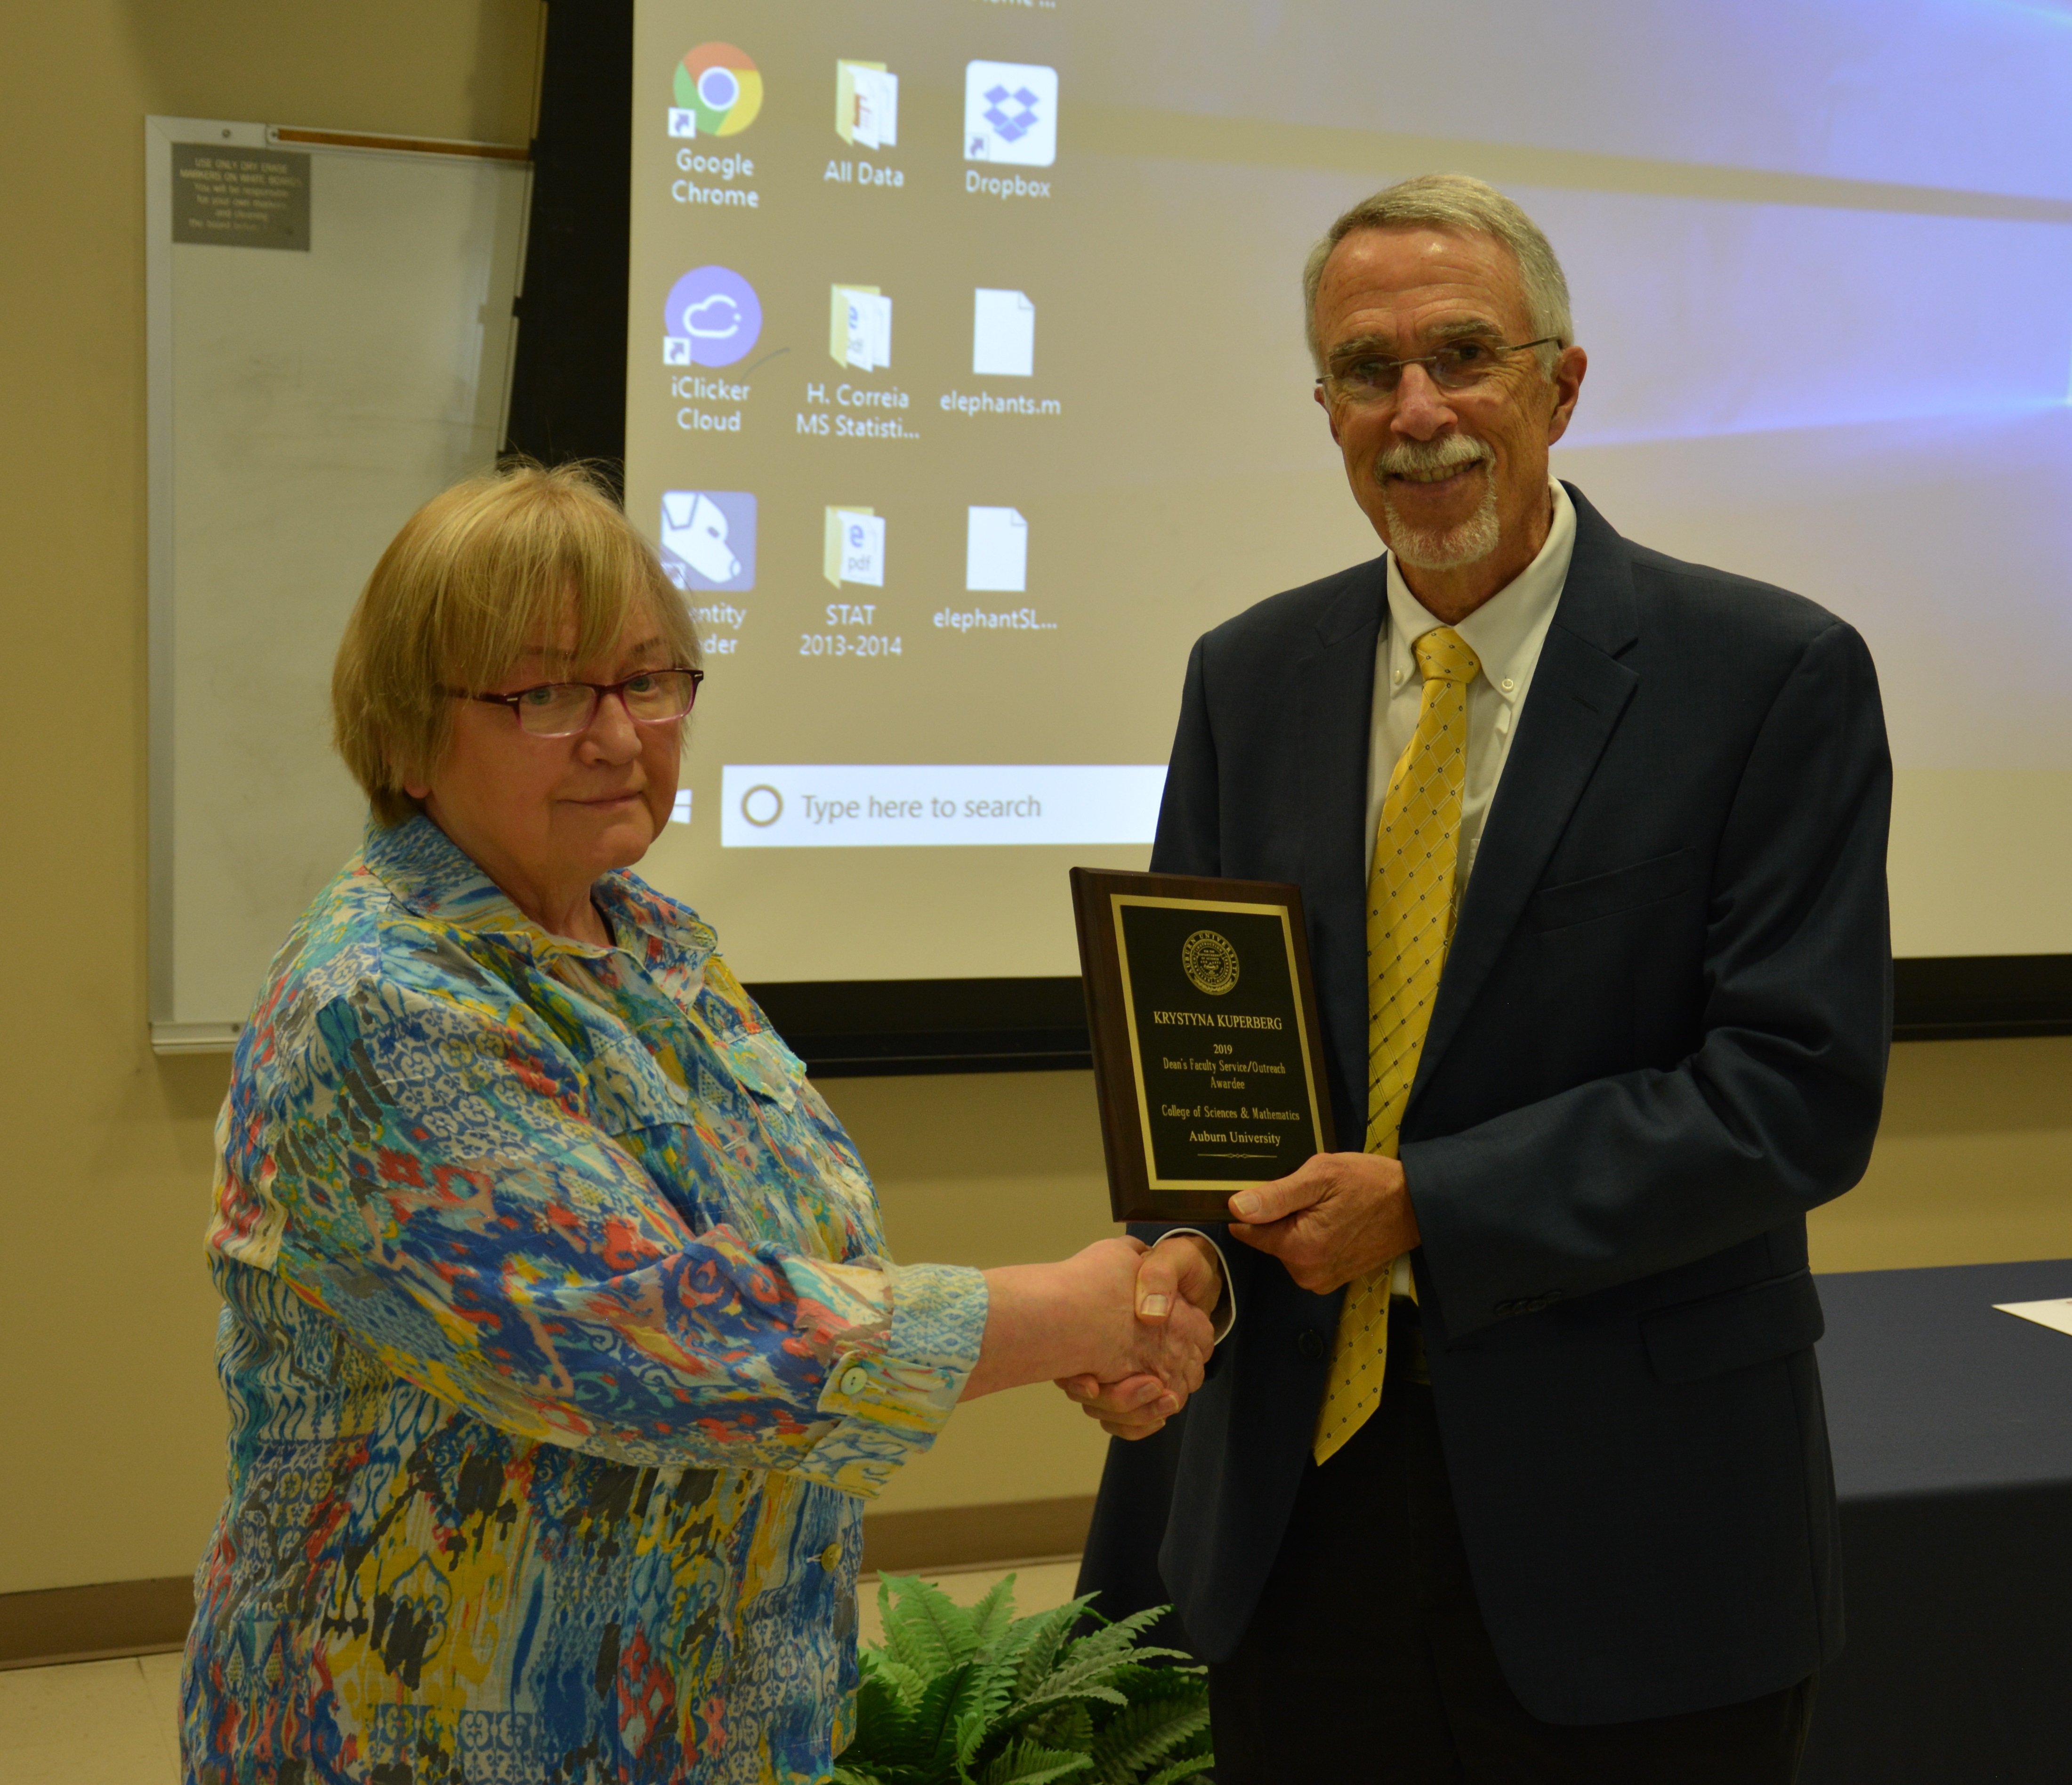 Dr. Krystyna Kuperberg, professor in the Department of Mathematics and Statistics, receives a Faculty Service/Outreach Award from Dean Giordano.